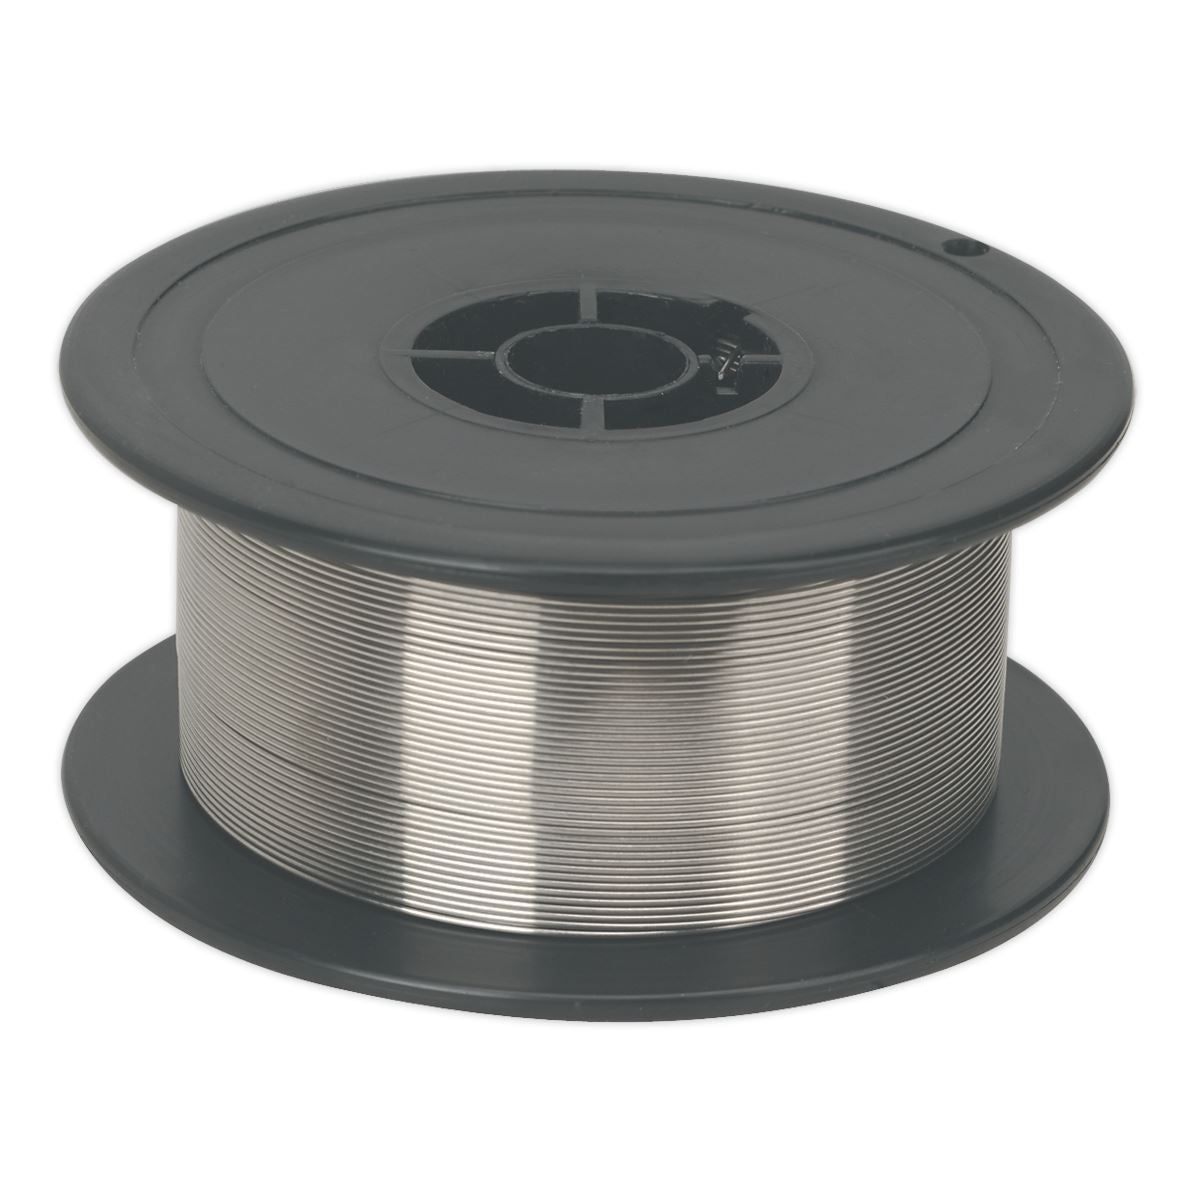 Sealey Stainless Steel MIG Wire 1kg Ø0.8mm 308(S)93 Grade